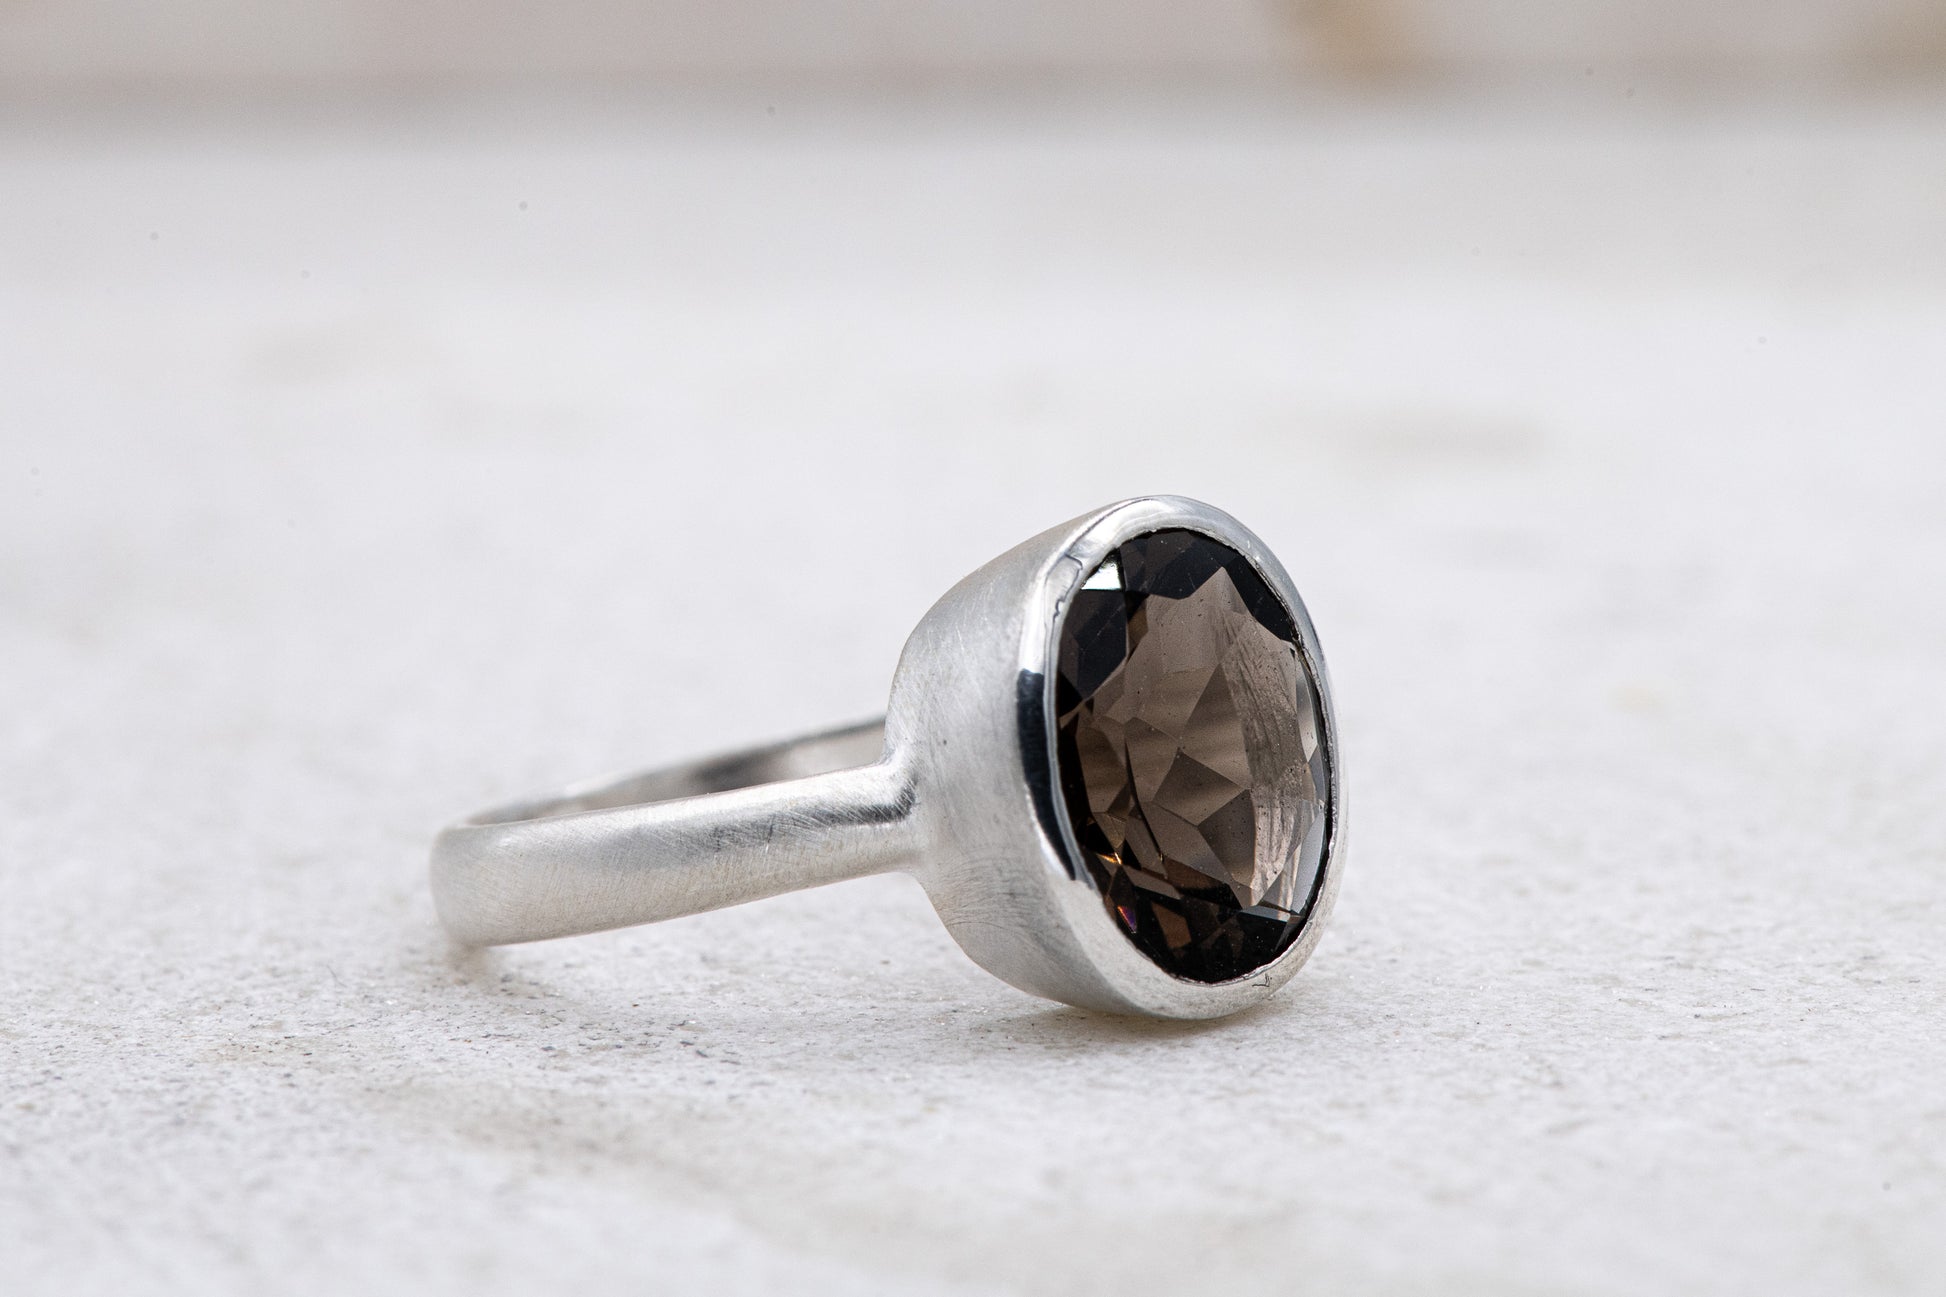 A handmade Solitaire Smoky Quartz Ring from Cassin Jewelry.